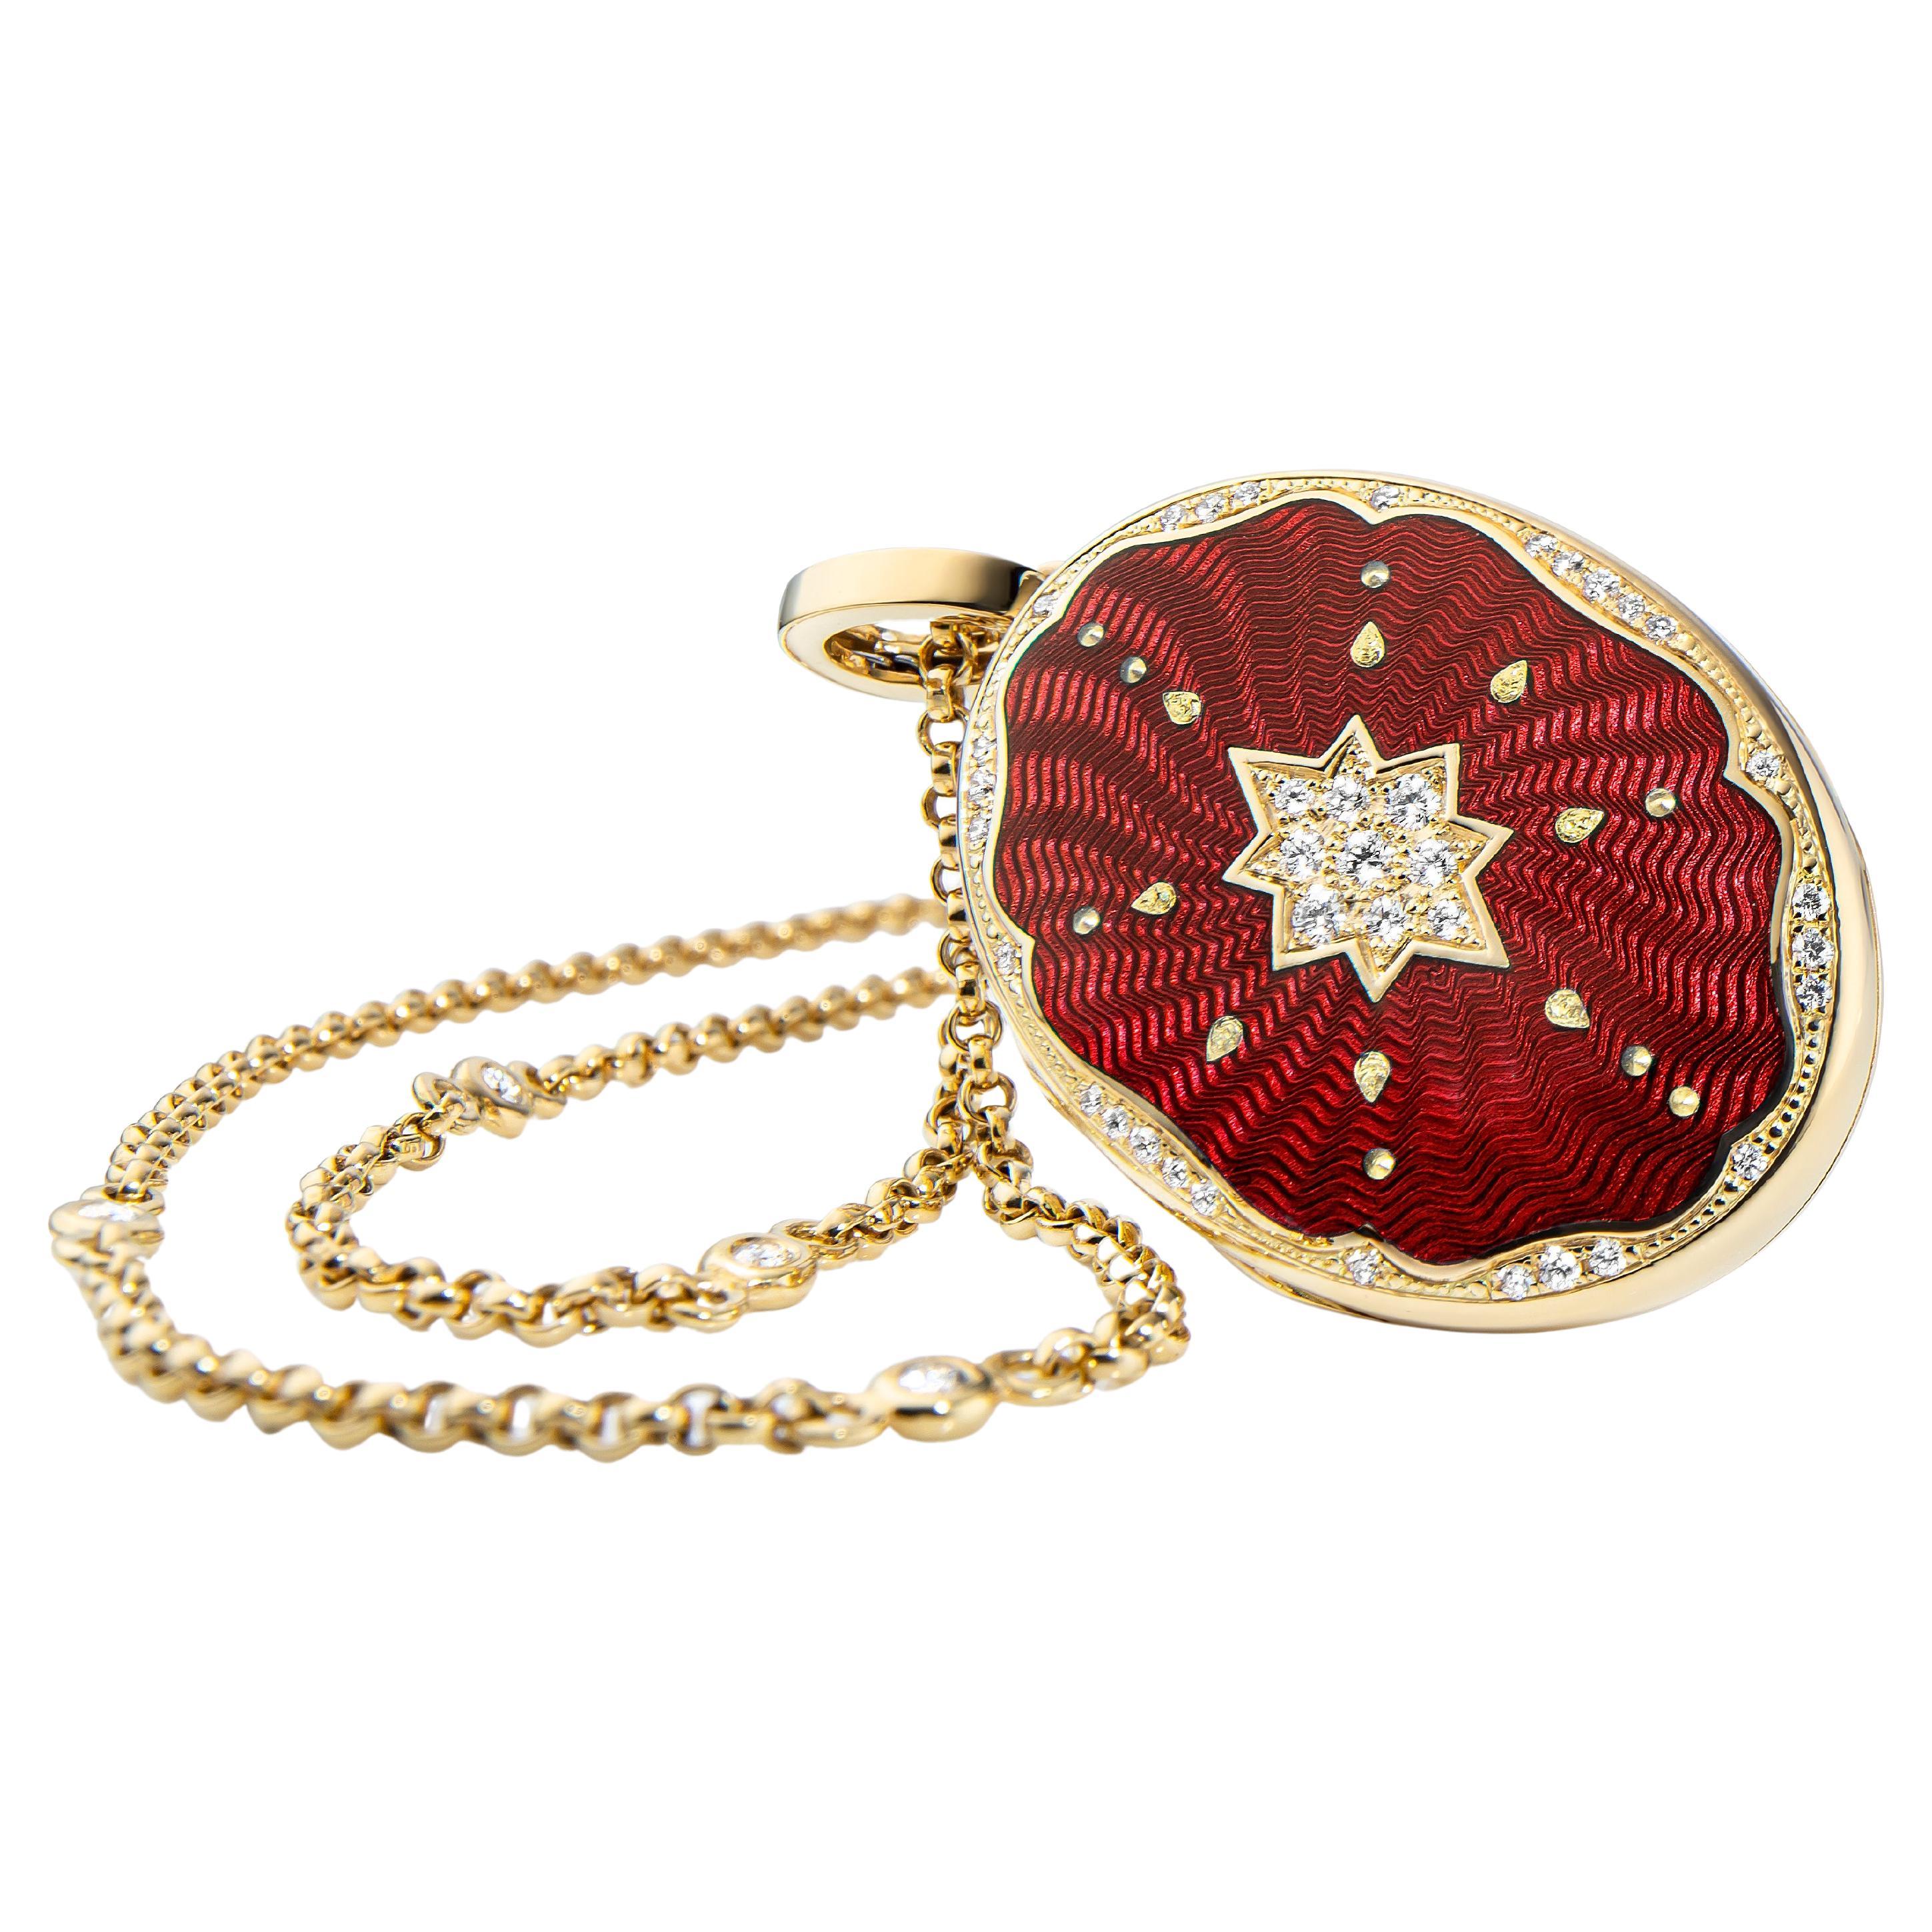 Oval Locket Pendant Necklace 18k Yellow Gold Red Enamel 37 Diamonds 0.29 ct G VS For Sale